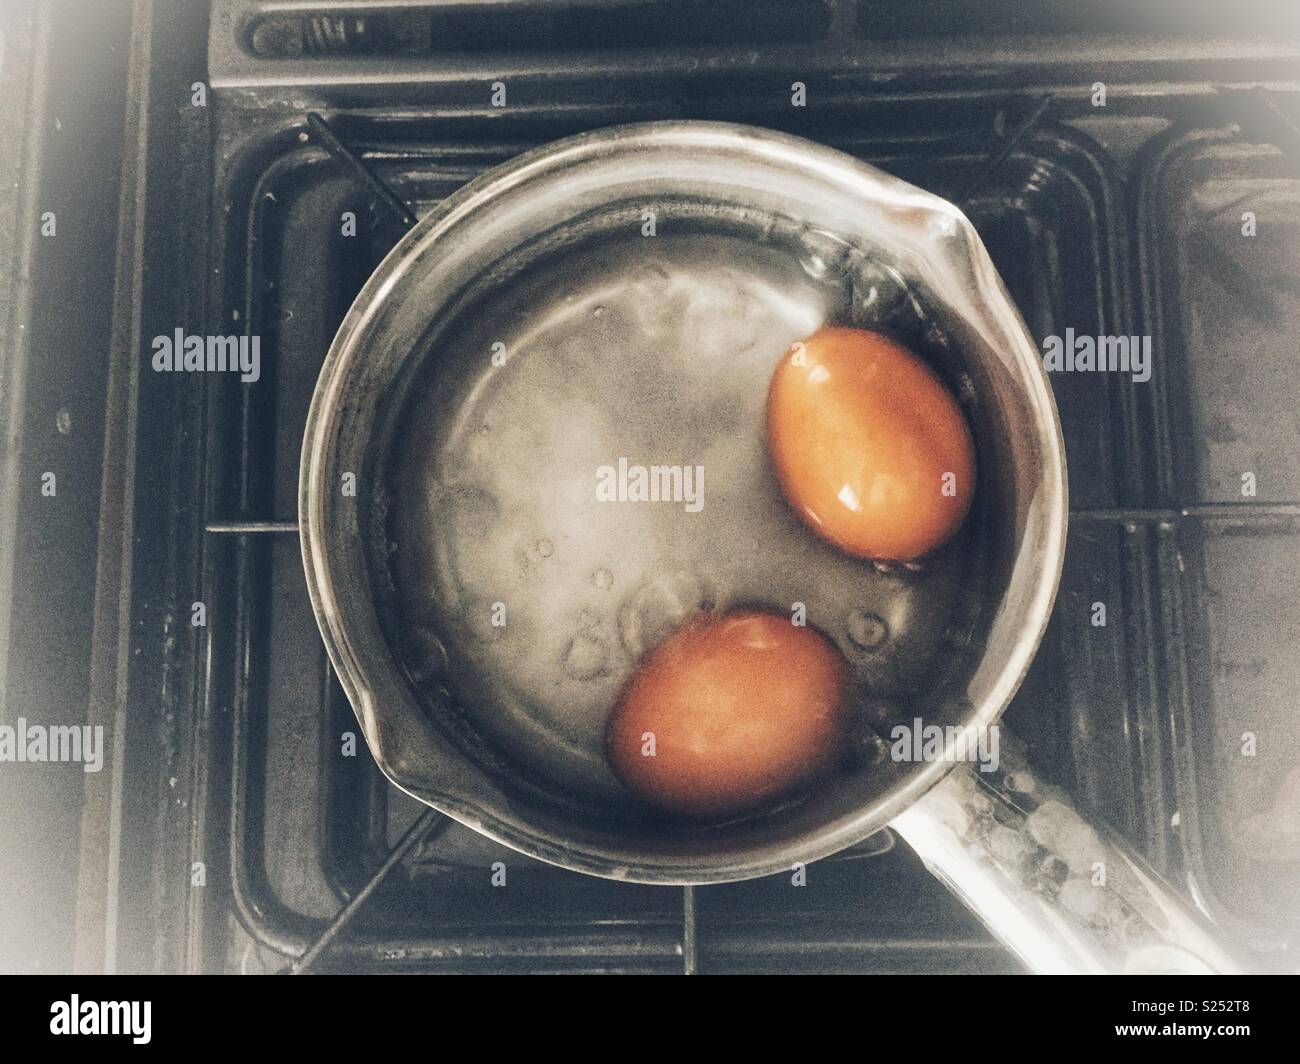 Boiling eggs in a pan on a gas hob. Stock Photo